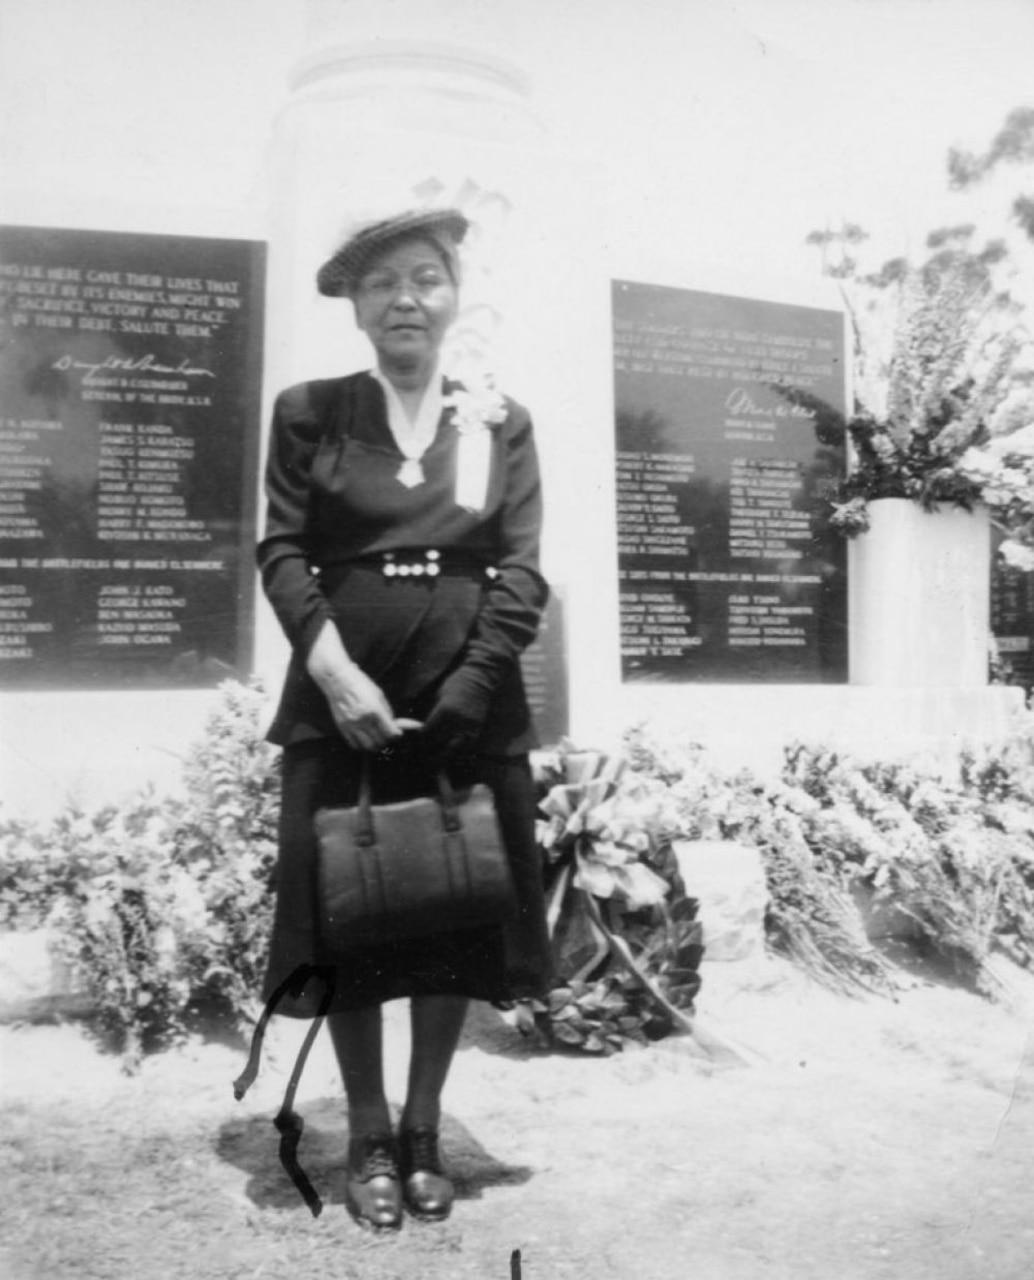 A woman wears a medal on her neck while standing in front of a monument.